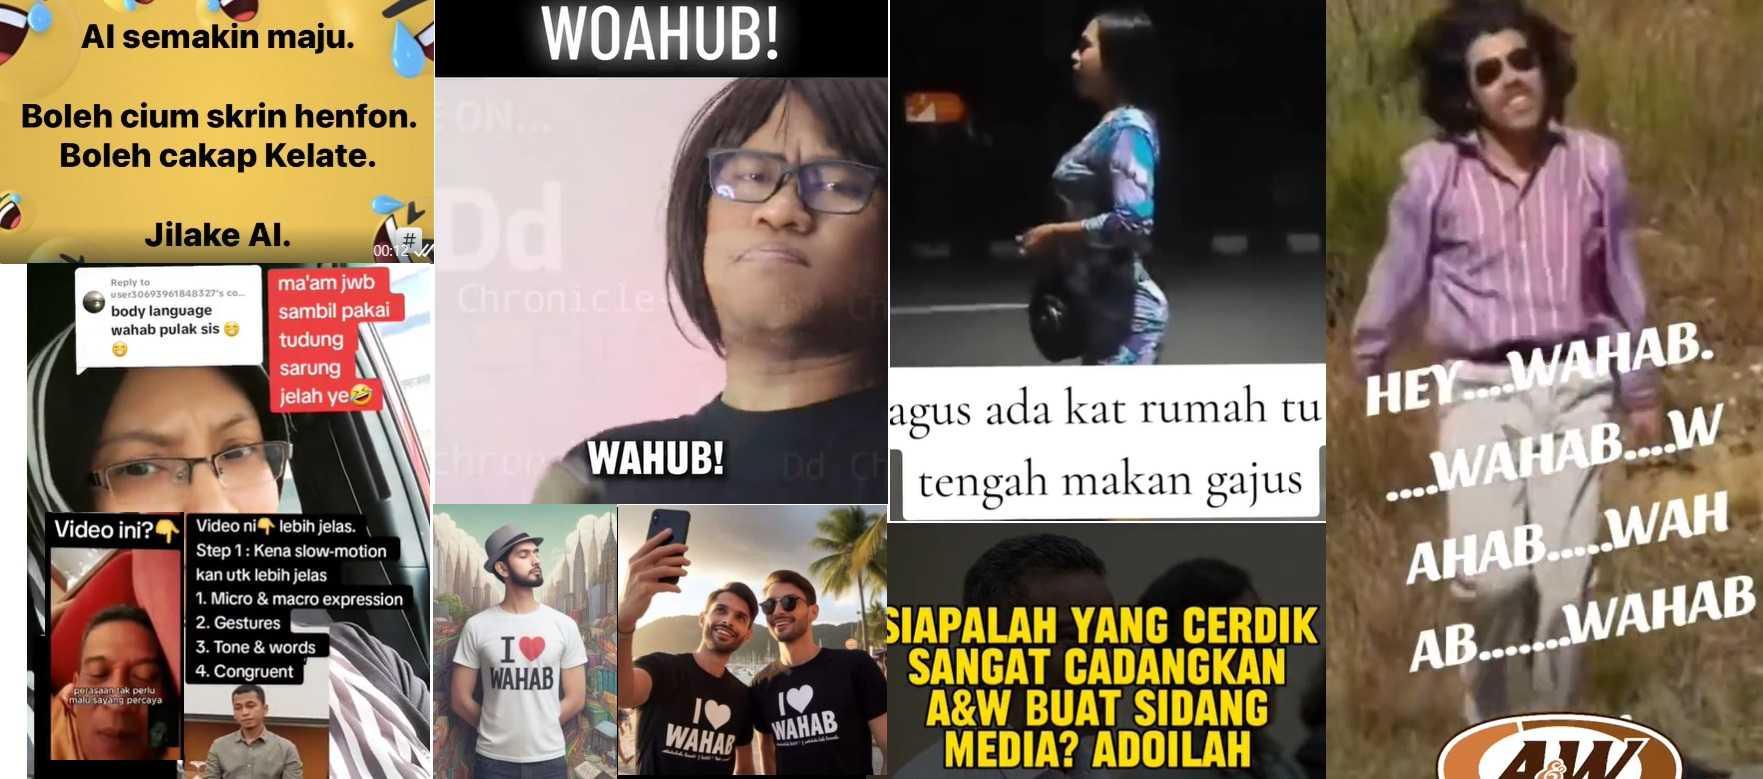 Examples of the memes which have flooded social media in the wake of a video clip showing former J-KOM chief Mohammad Agus Yusoff in a sexually charged video call.
